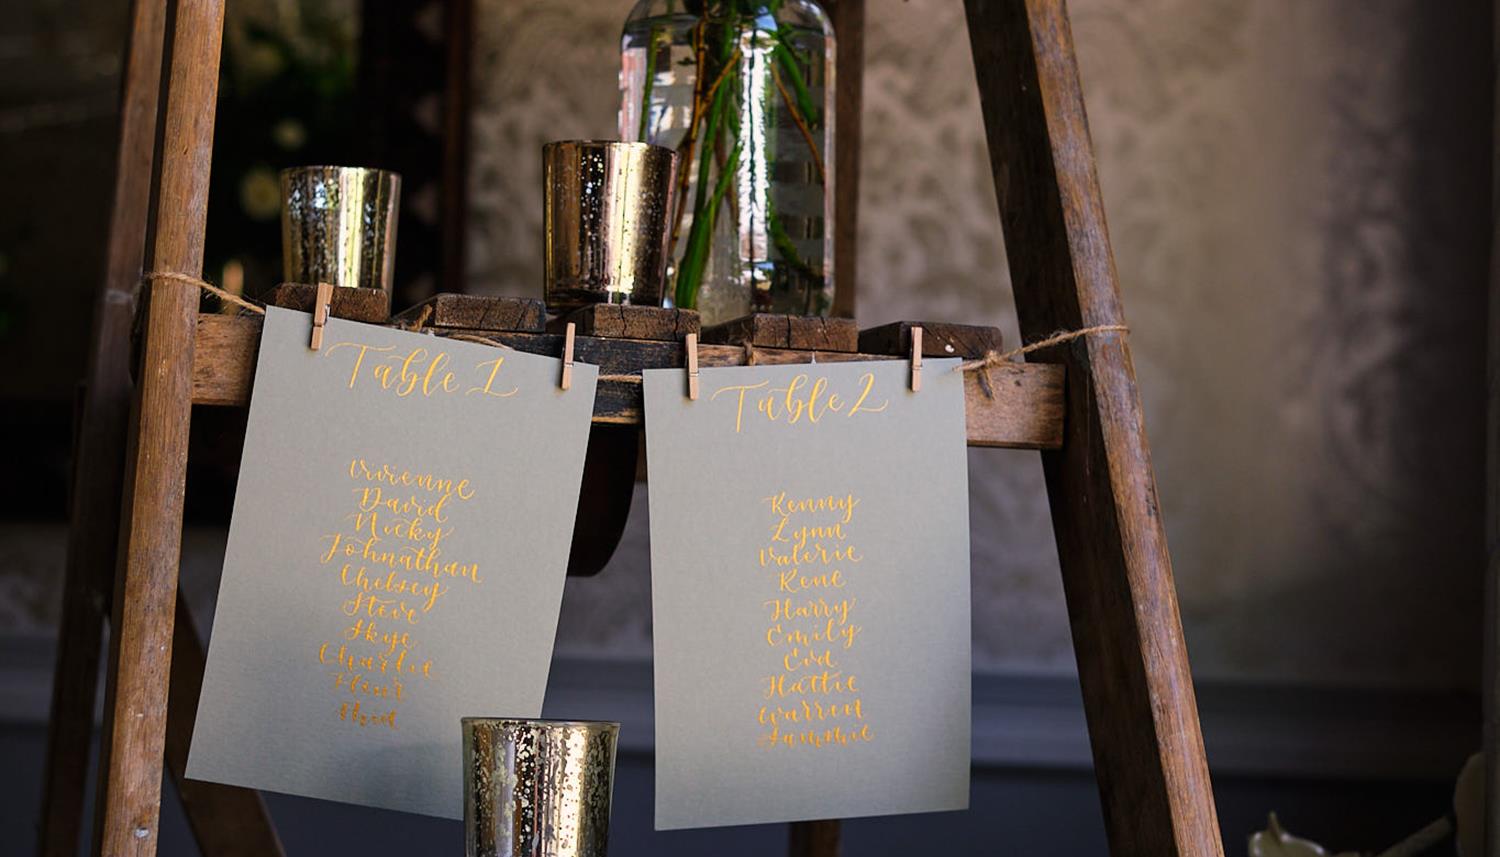 Table cards. Photo Credit: Tom Heath Photography